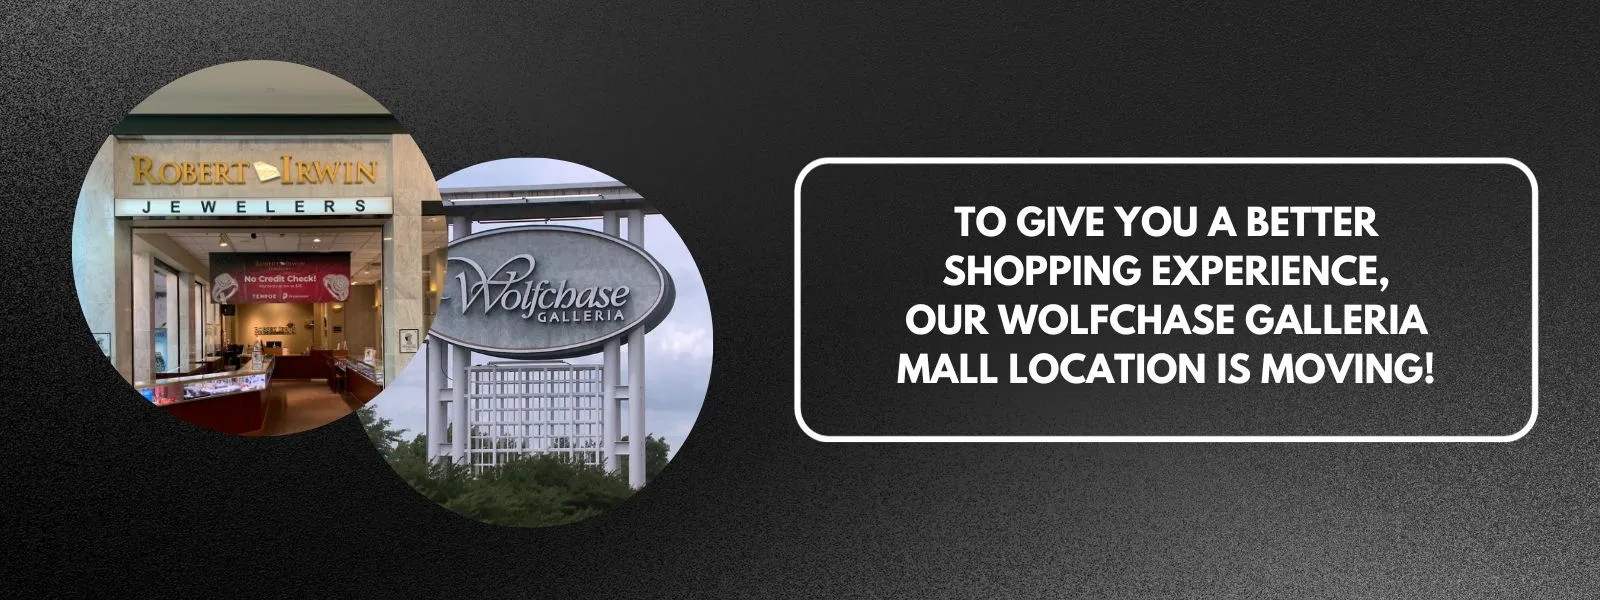 Robert Irwin Jewelers - Wolfchase Galleria Mall is Moving to Bartlett,TN!